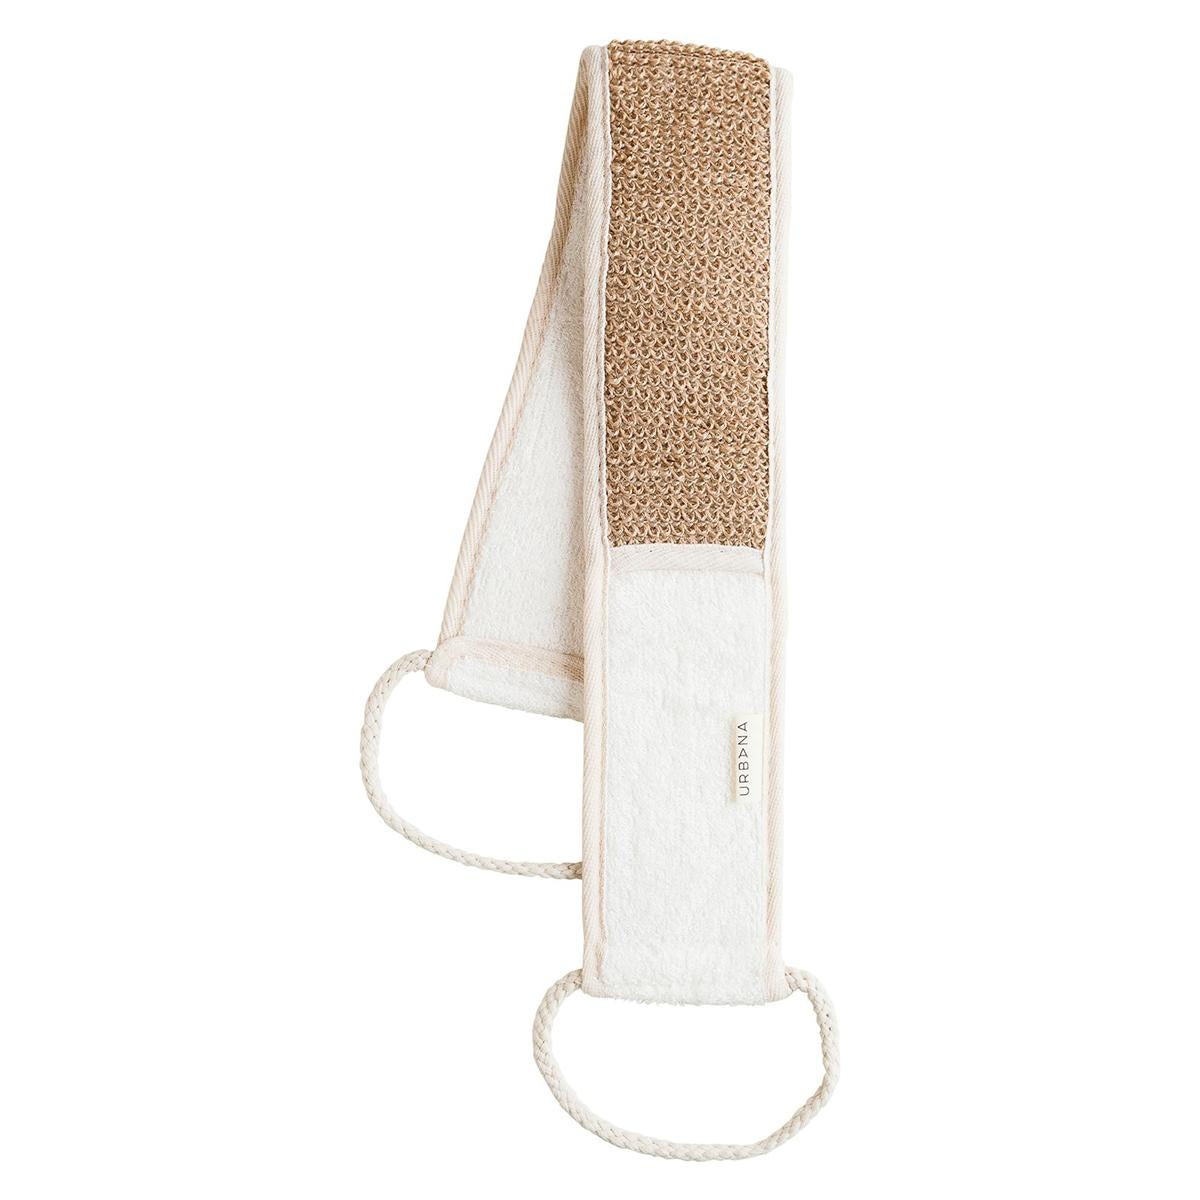 Primary image of Bamboo Back Strap